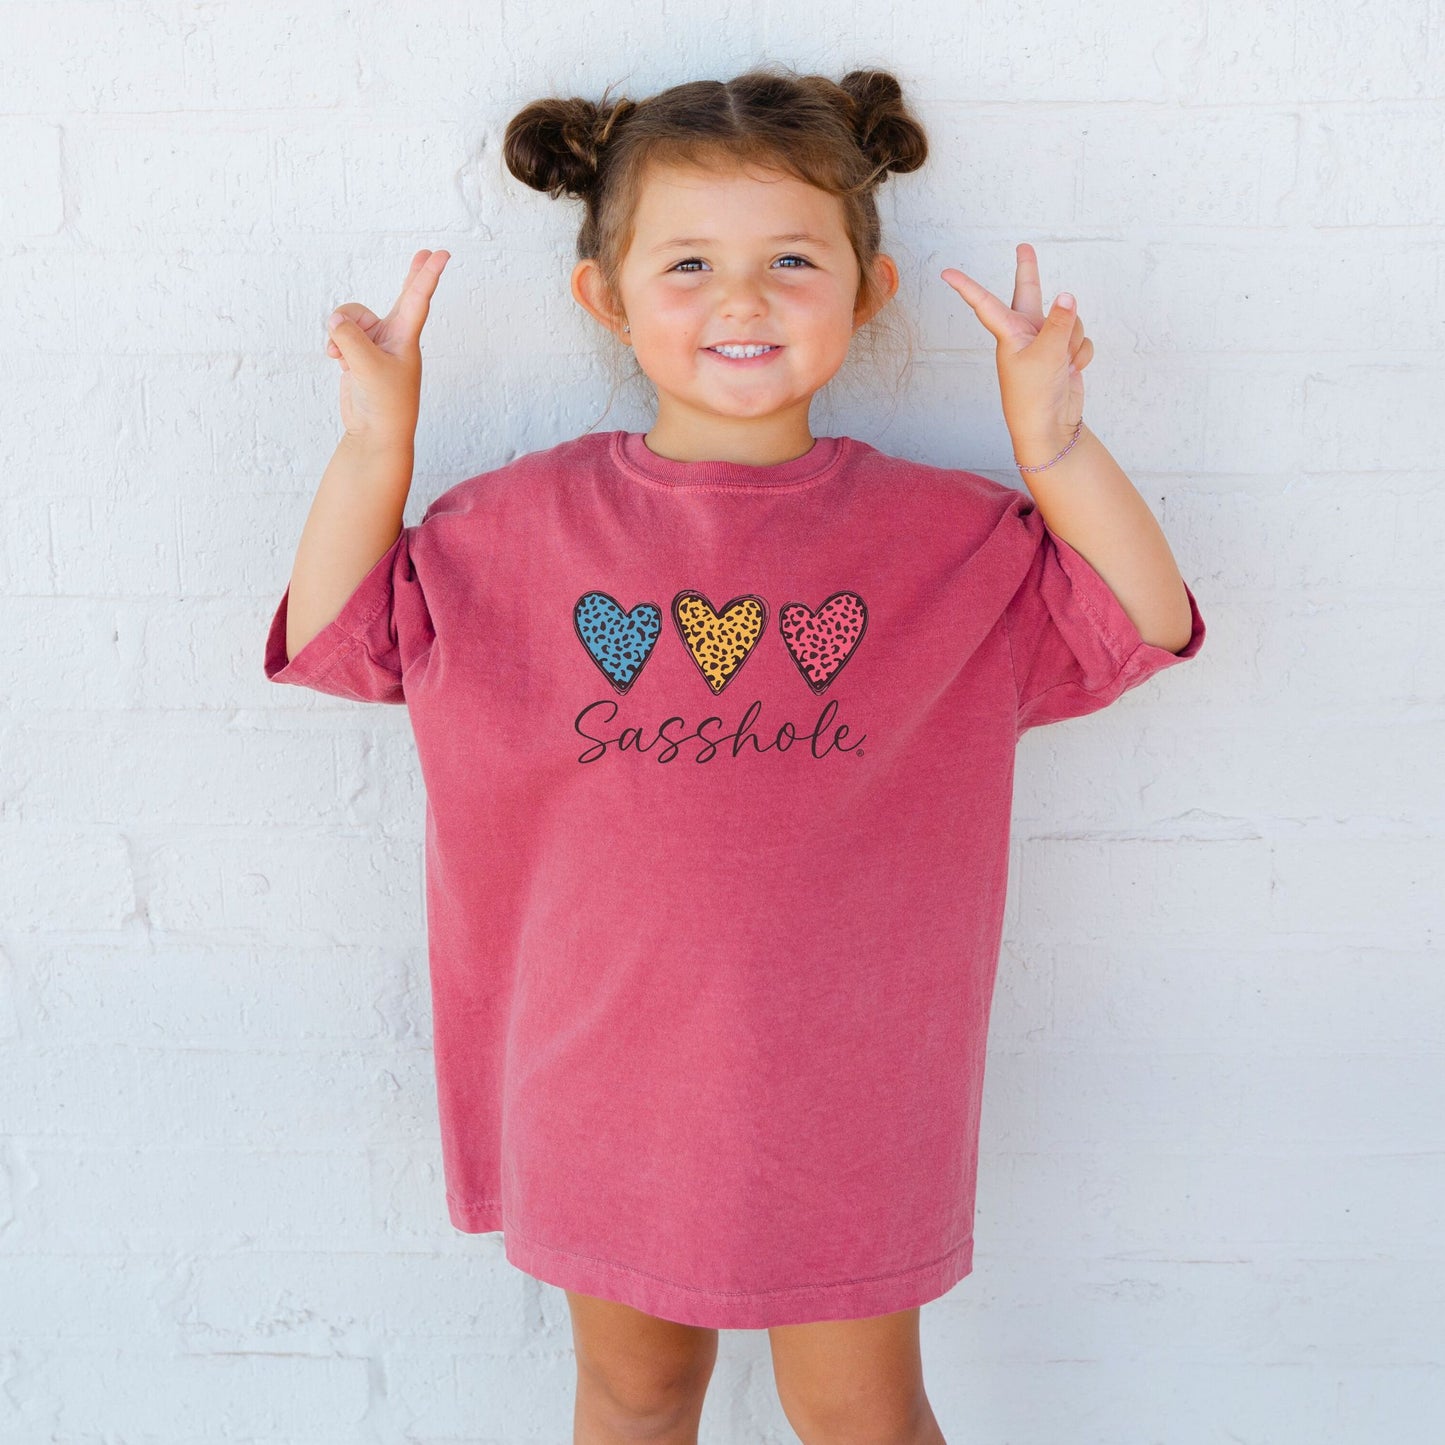 youth girls t-shirt, youth girl casual wear, youth clothing variety, youth clothing essentials, whimsical graphic design, vibrant youth styles, vibrant youth apparel, Unisex, unique kids clothing, unique graphic print style, trendy graphic print fashion, trendy children's apparel, toddler girl statement tee, T-shirts, stylish toddler outfit, stylish graphic tee for girls, statement tee for girls, sassy youth fashion, sassy slogan tee, Regular fit